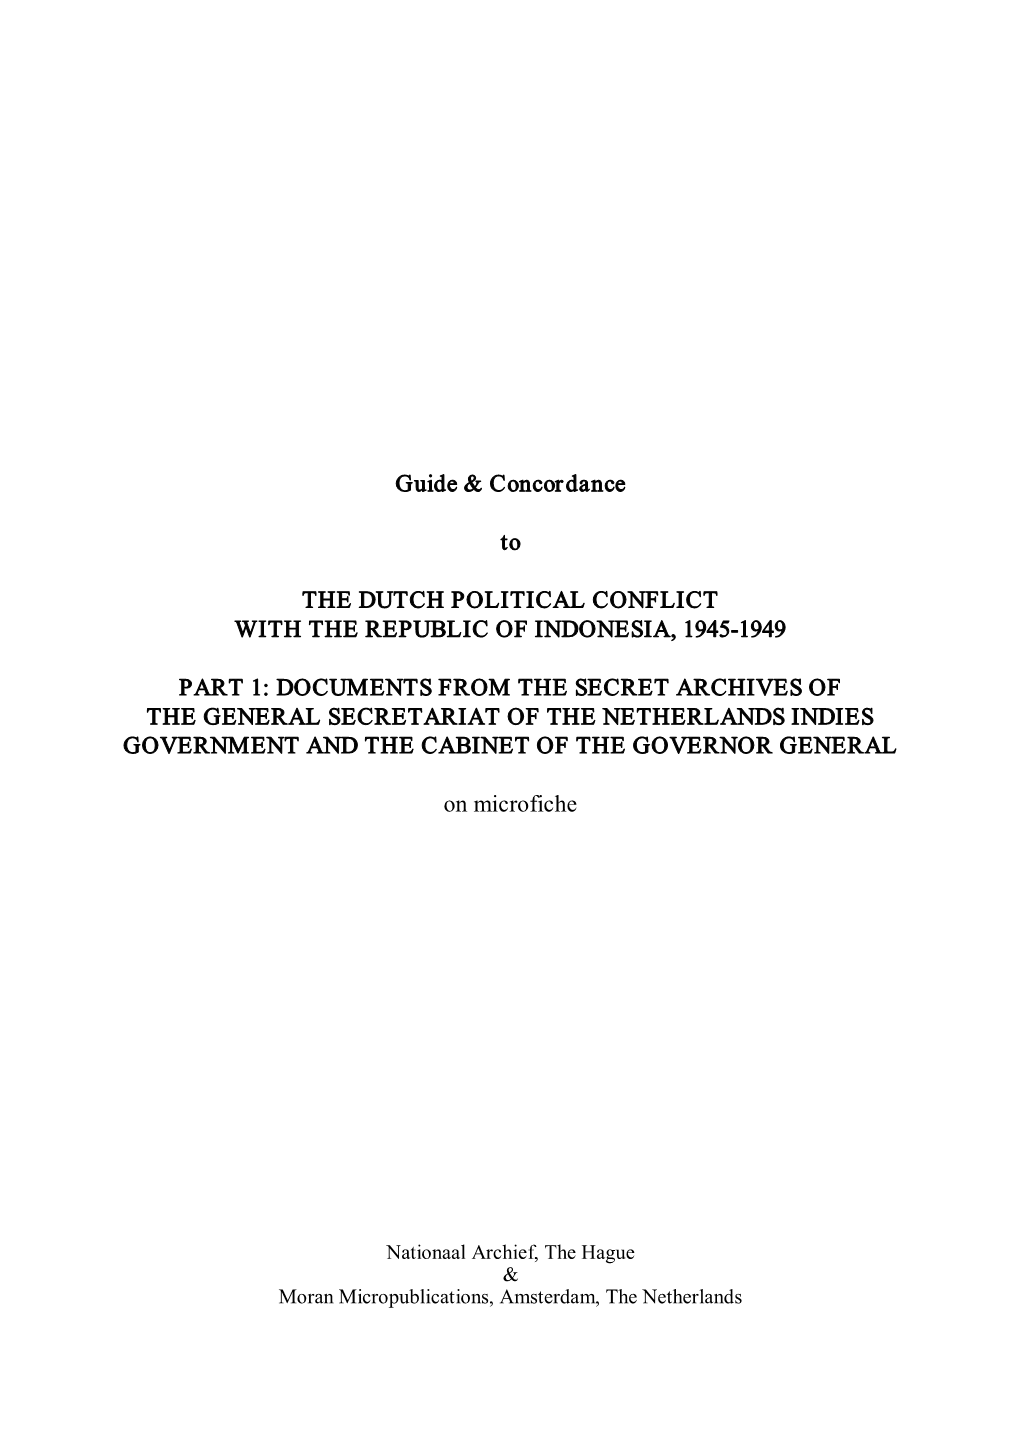 Guide & Concordance to the DUTCH POLITICAL CONFLICT with THE